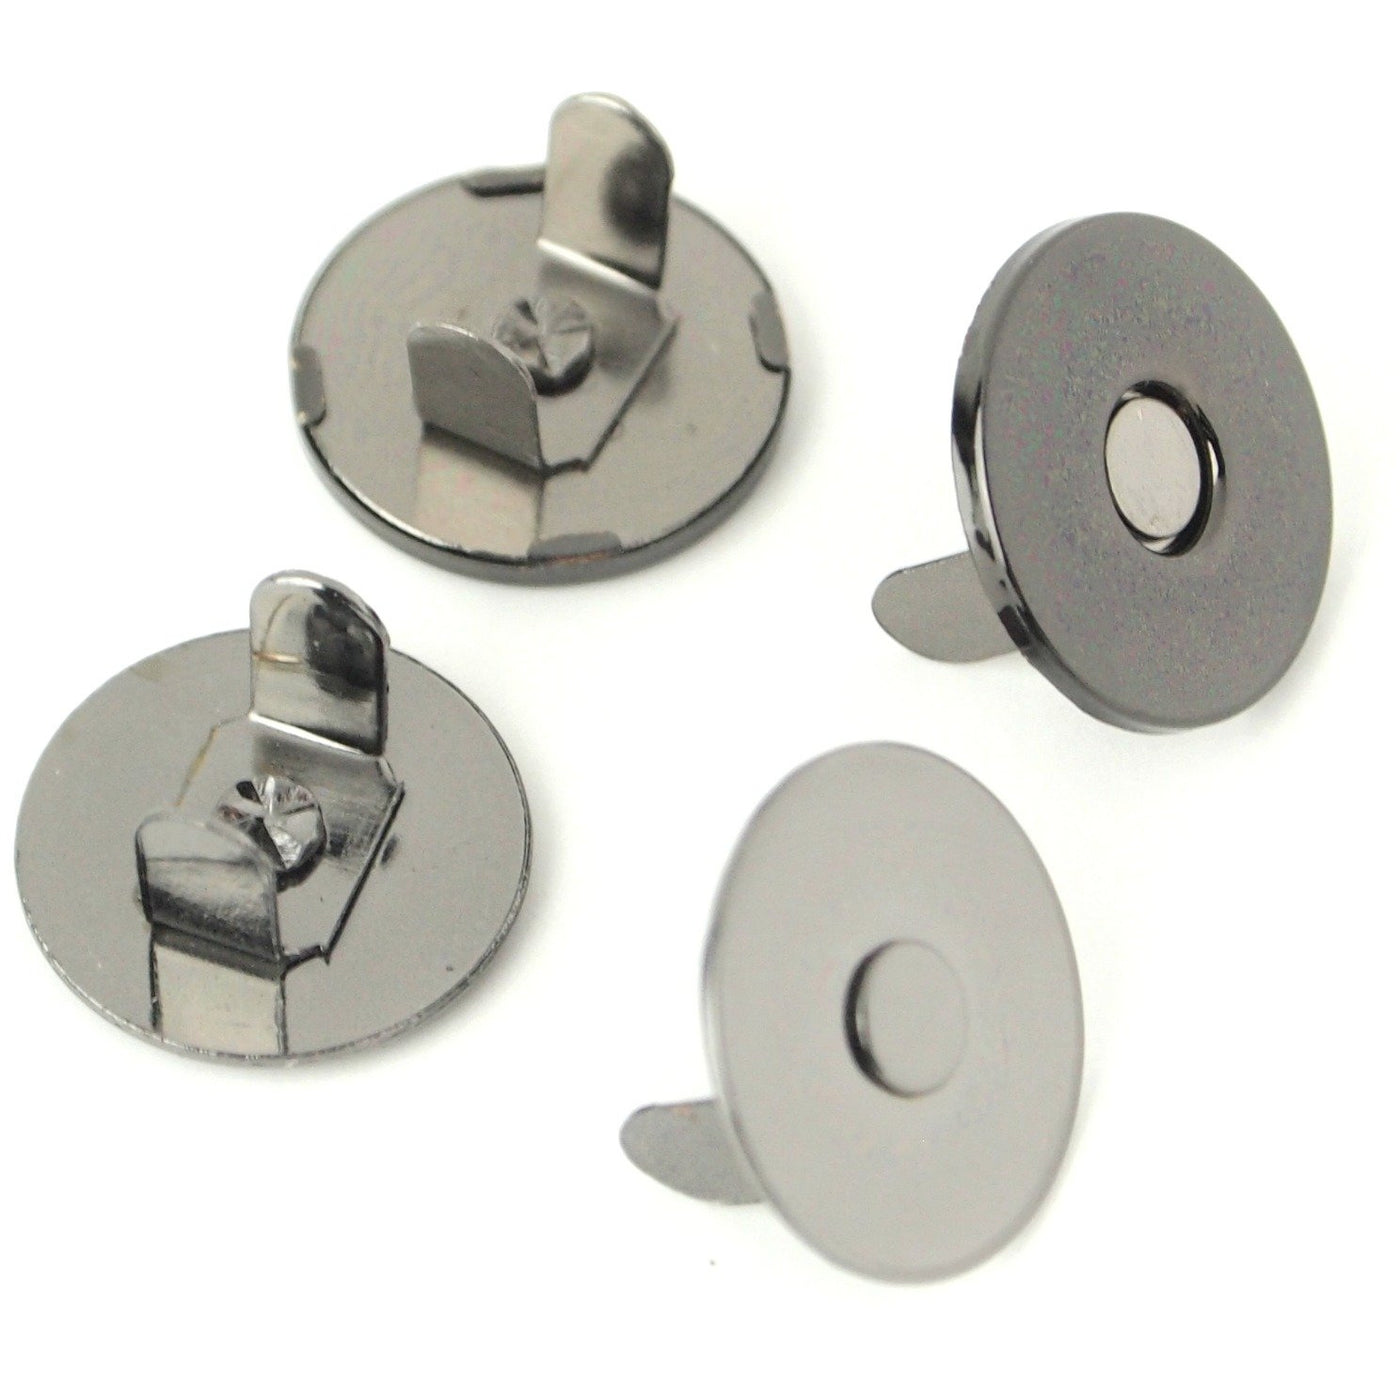 How to choose the best magnetic snaps supplier?